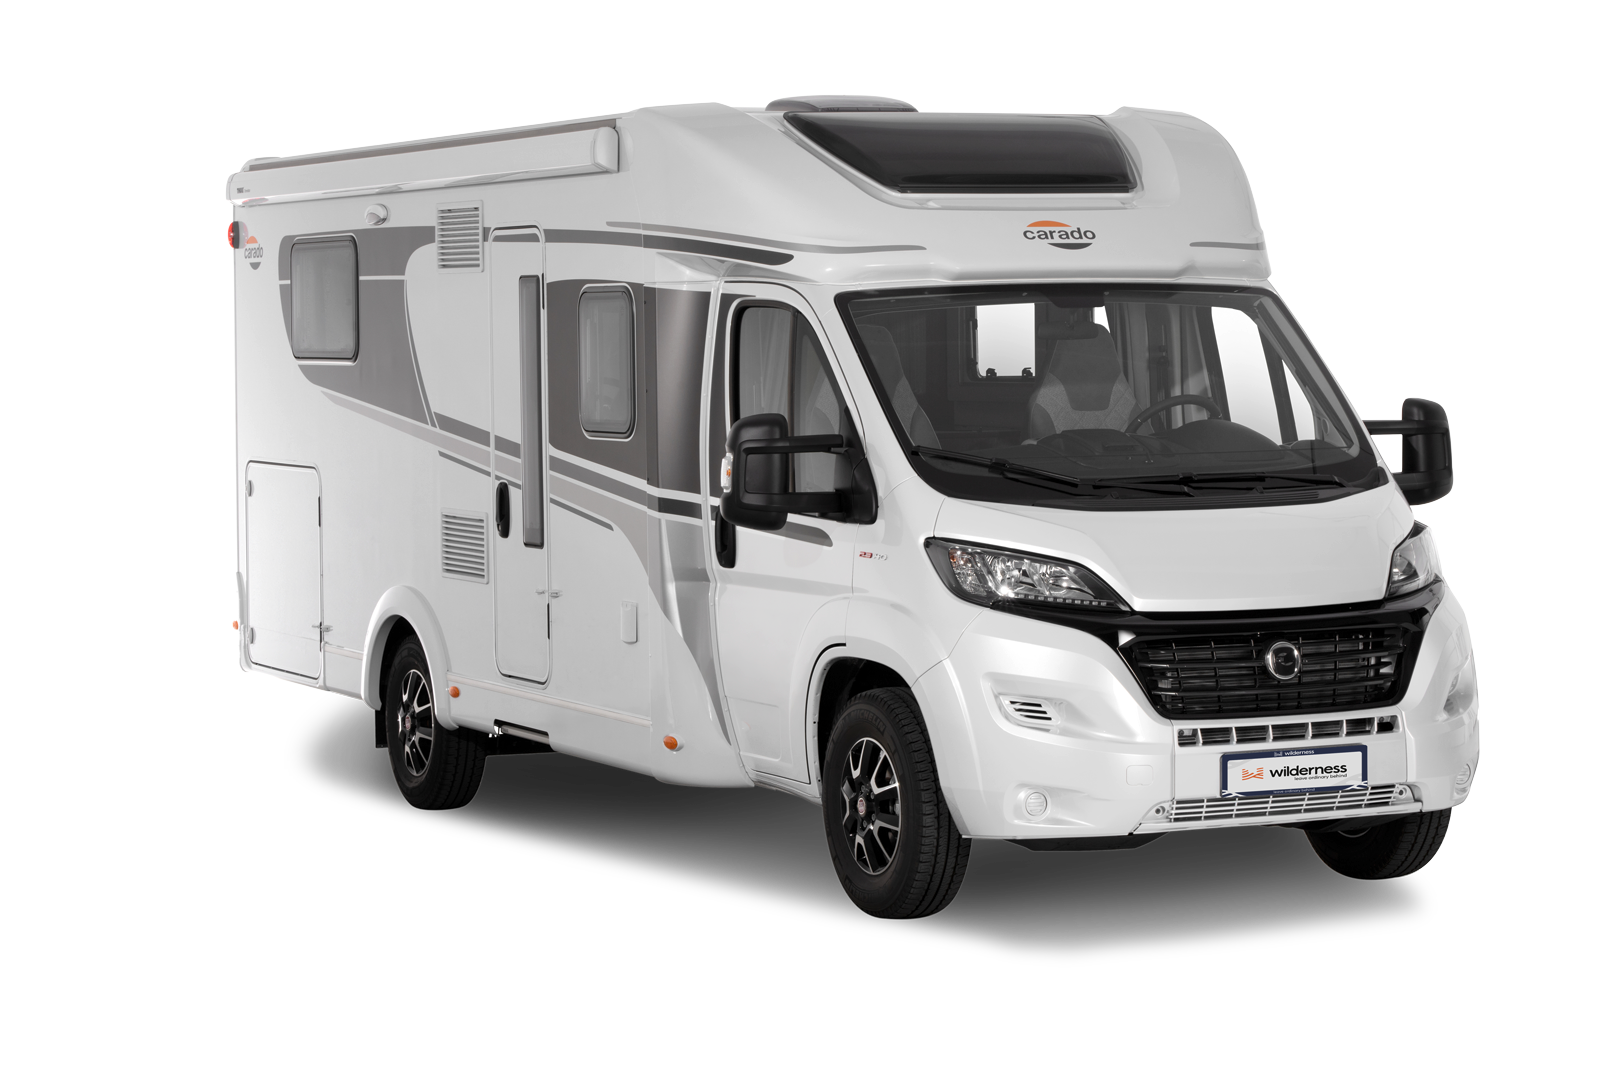 Wilderness 2022 Carado T459 motorhome interior clear cut side front view